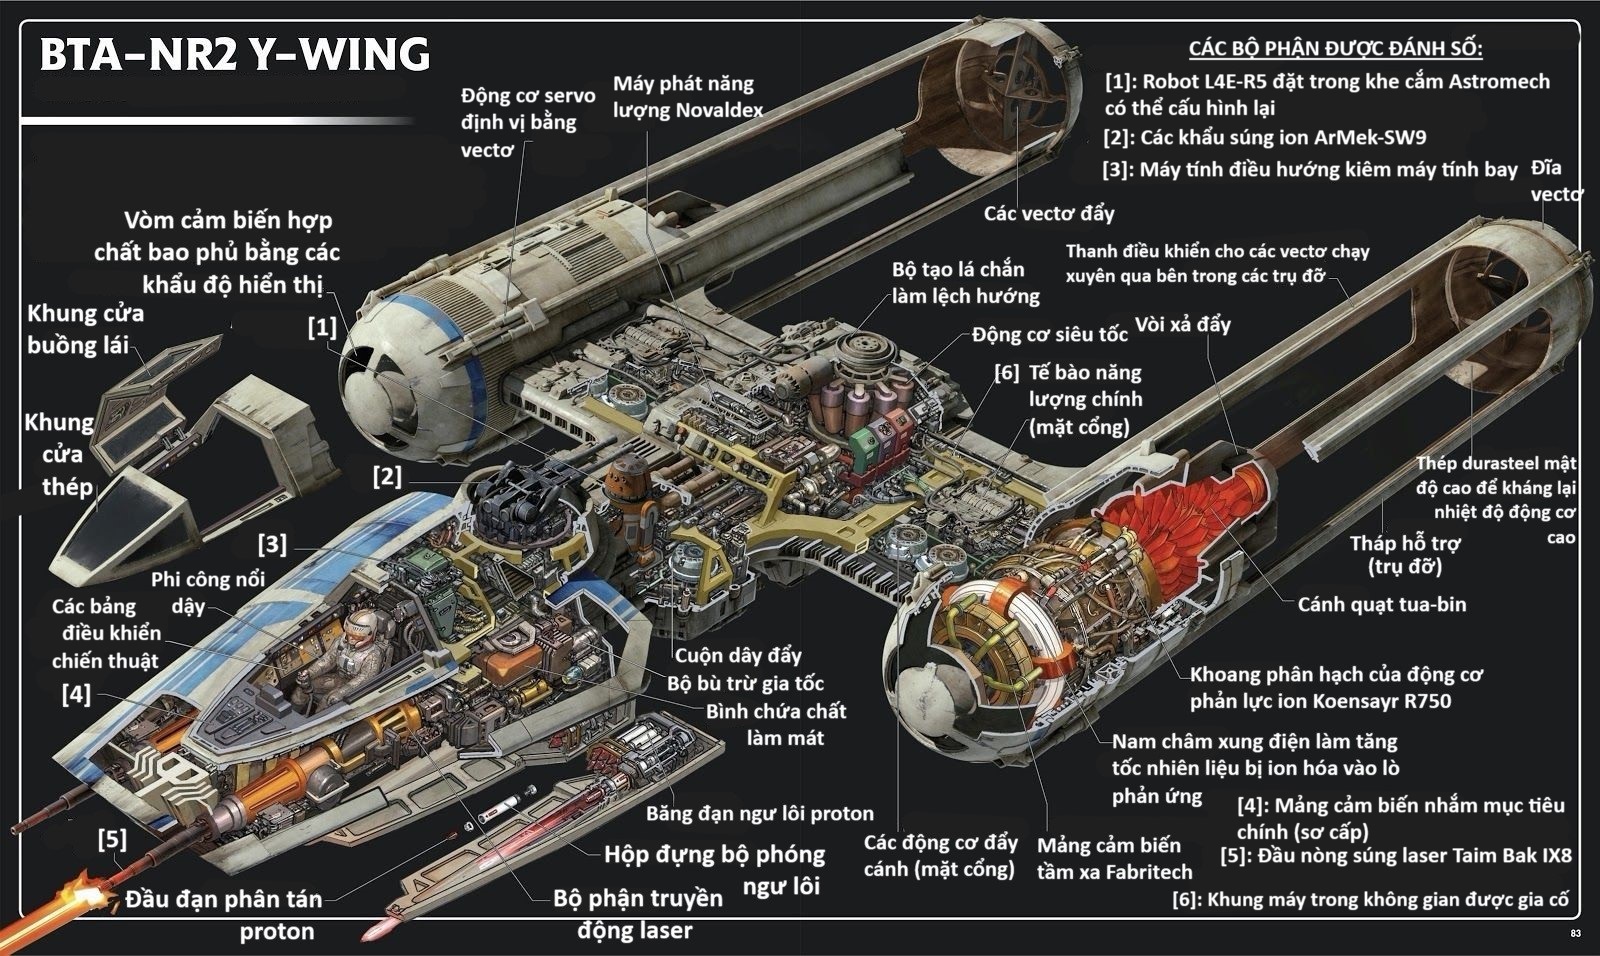 i-love-the-y-wing-i-love-its-clunky-rugged-no-nonsense-v0-gd3r5ycygn7a1 - Copy.jpg